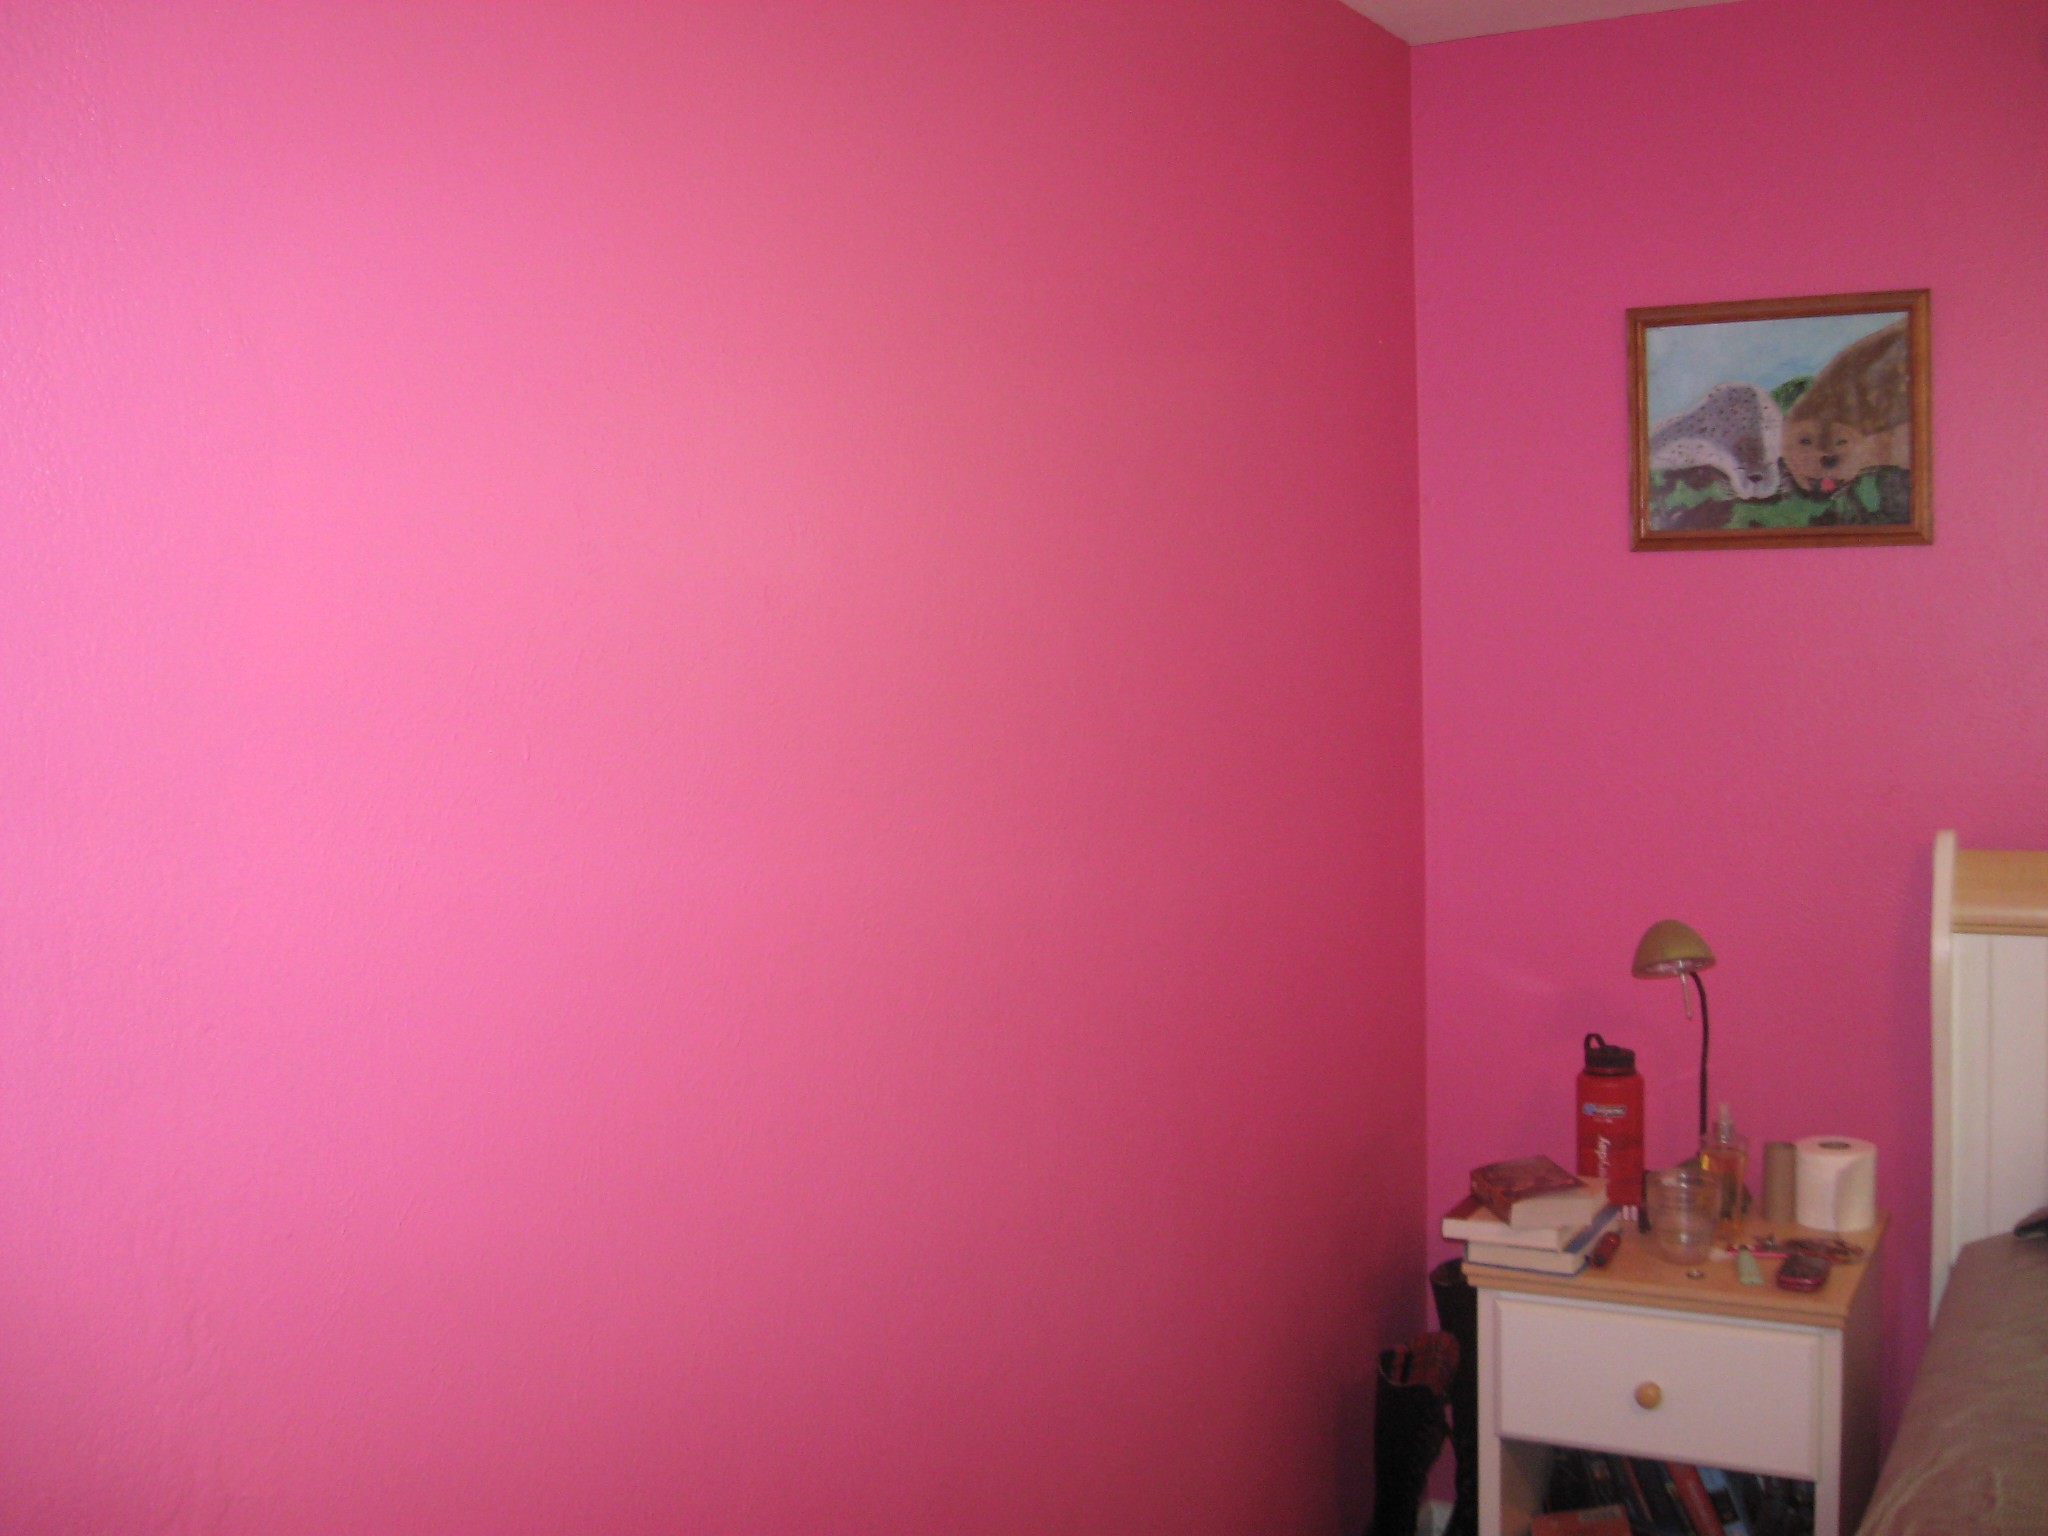 2048x1536 Wall Paint Colors Beige For Bathroom Master Goodbye Insane Barbie Pink  There Will Be Stuff. ...